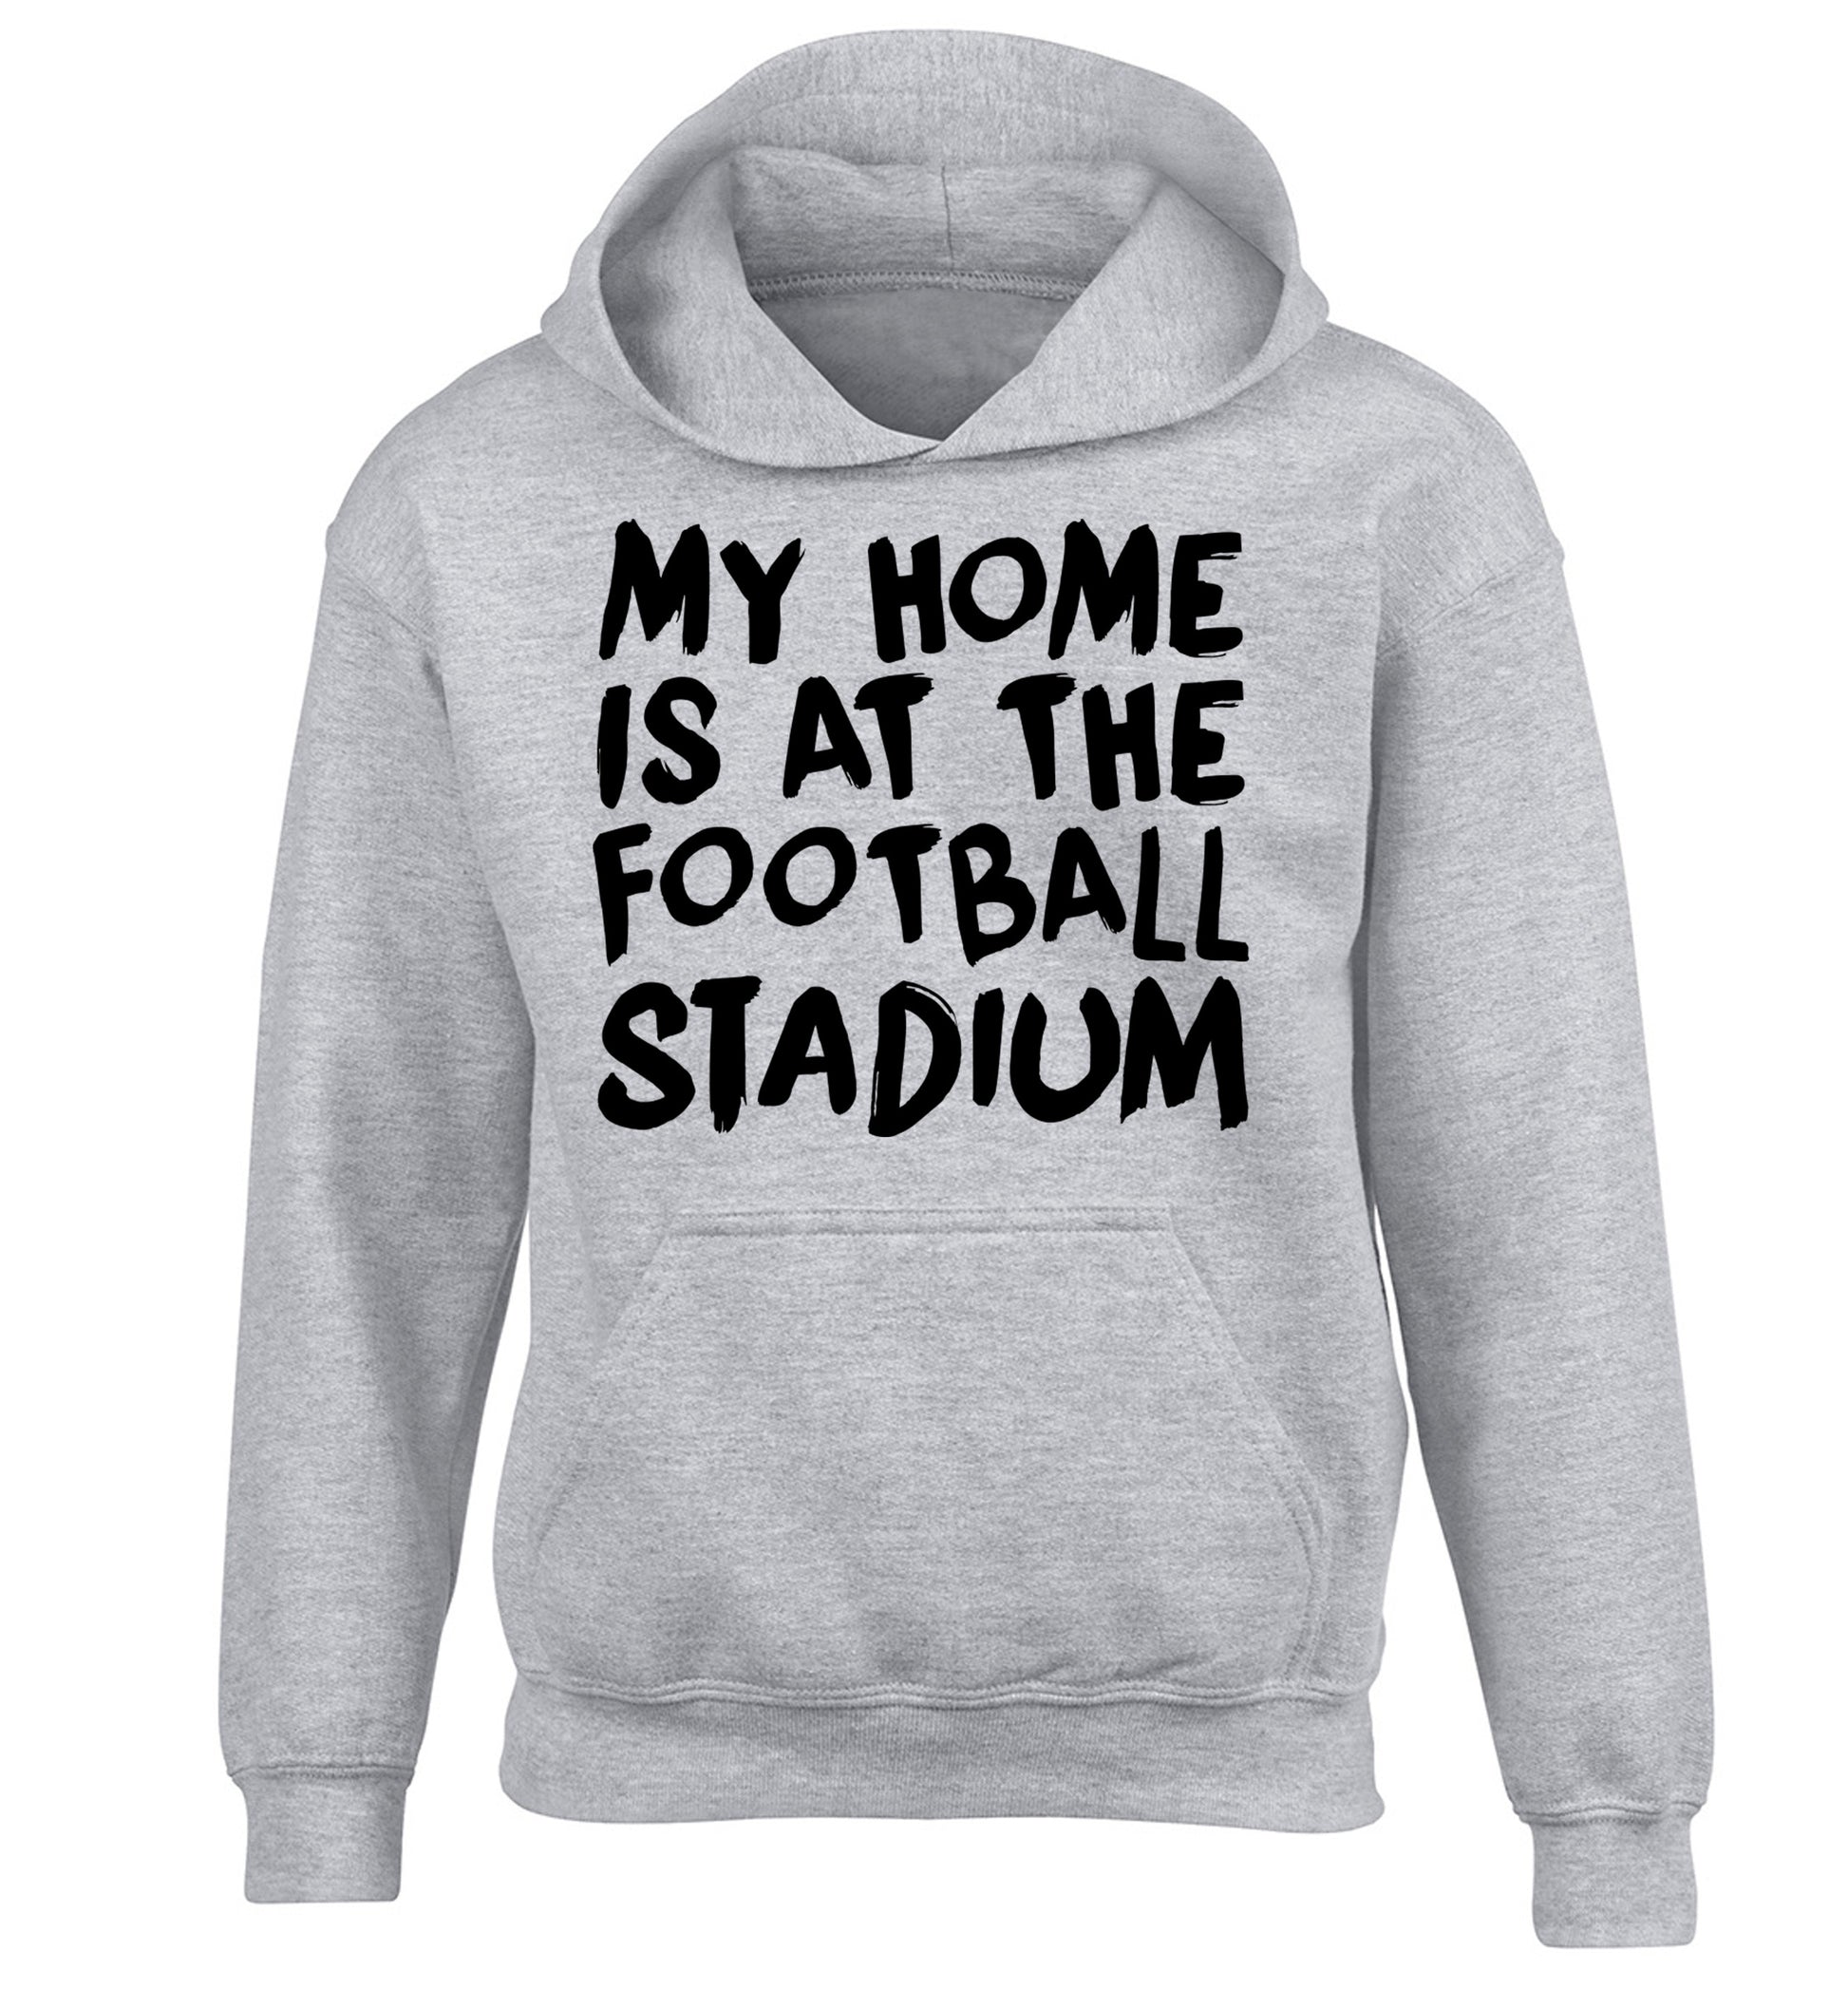 My home is at the football stadium children's grey hoodie 12-14 Years